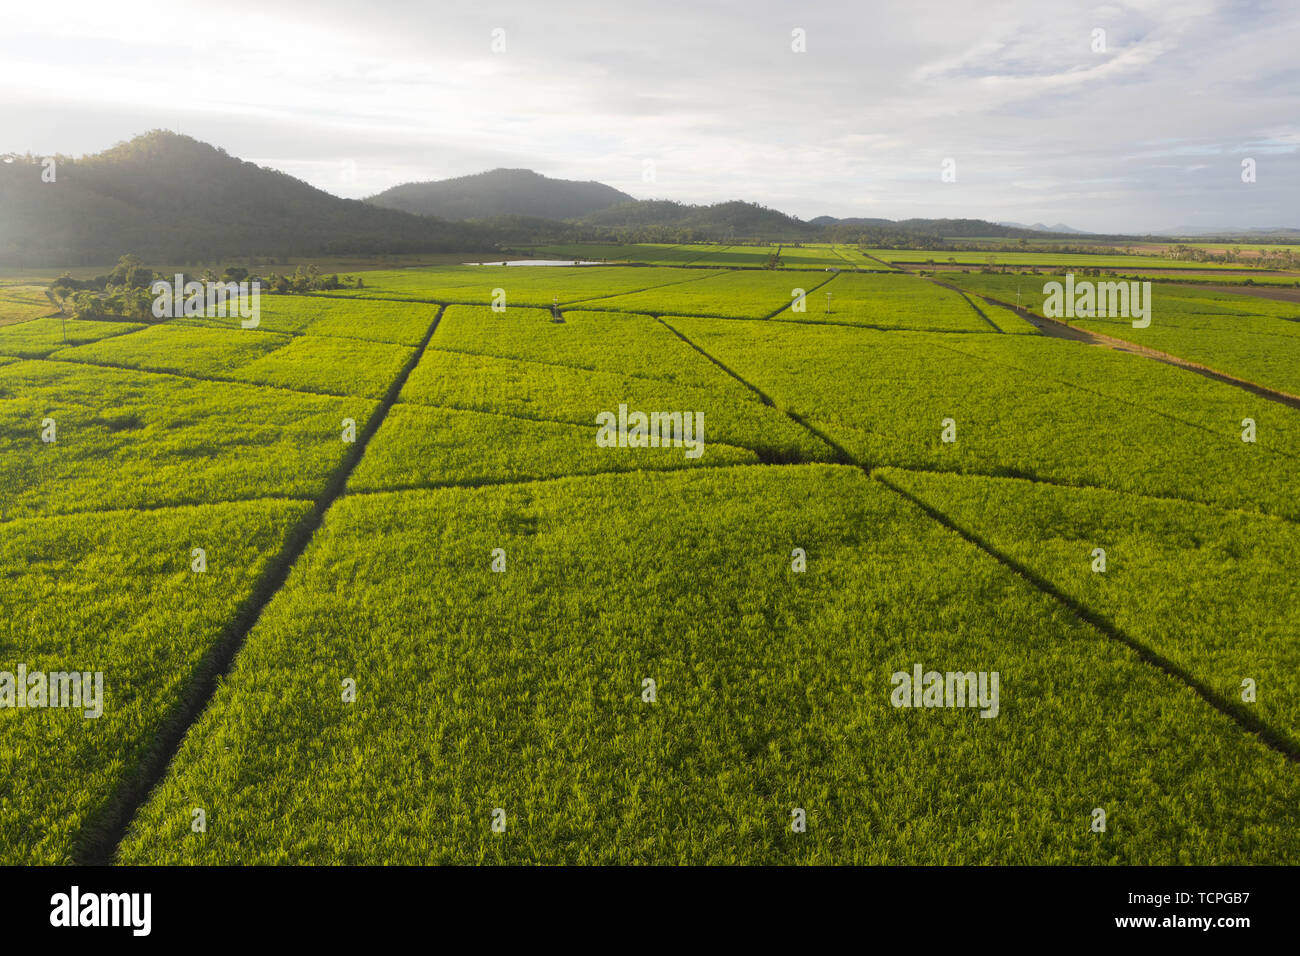 Aerial view over plantation of sugar canes agriculutural landscape in tropical wonderland with mountains in the background and path inbtween fields Stock Photo